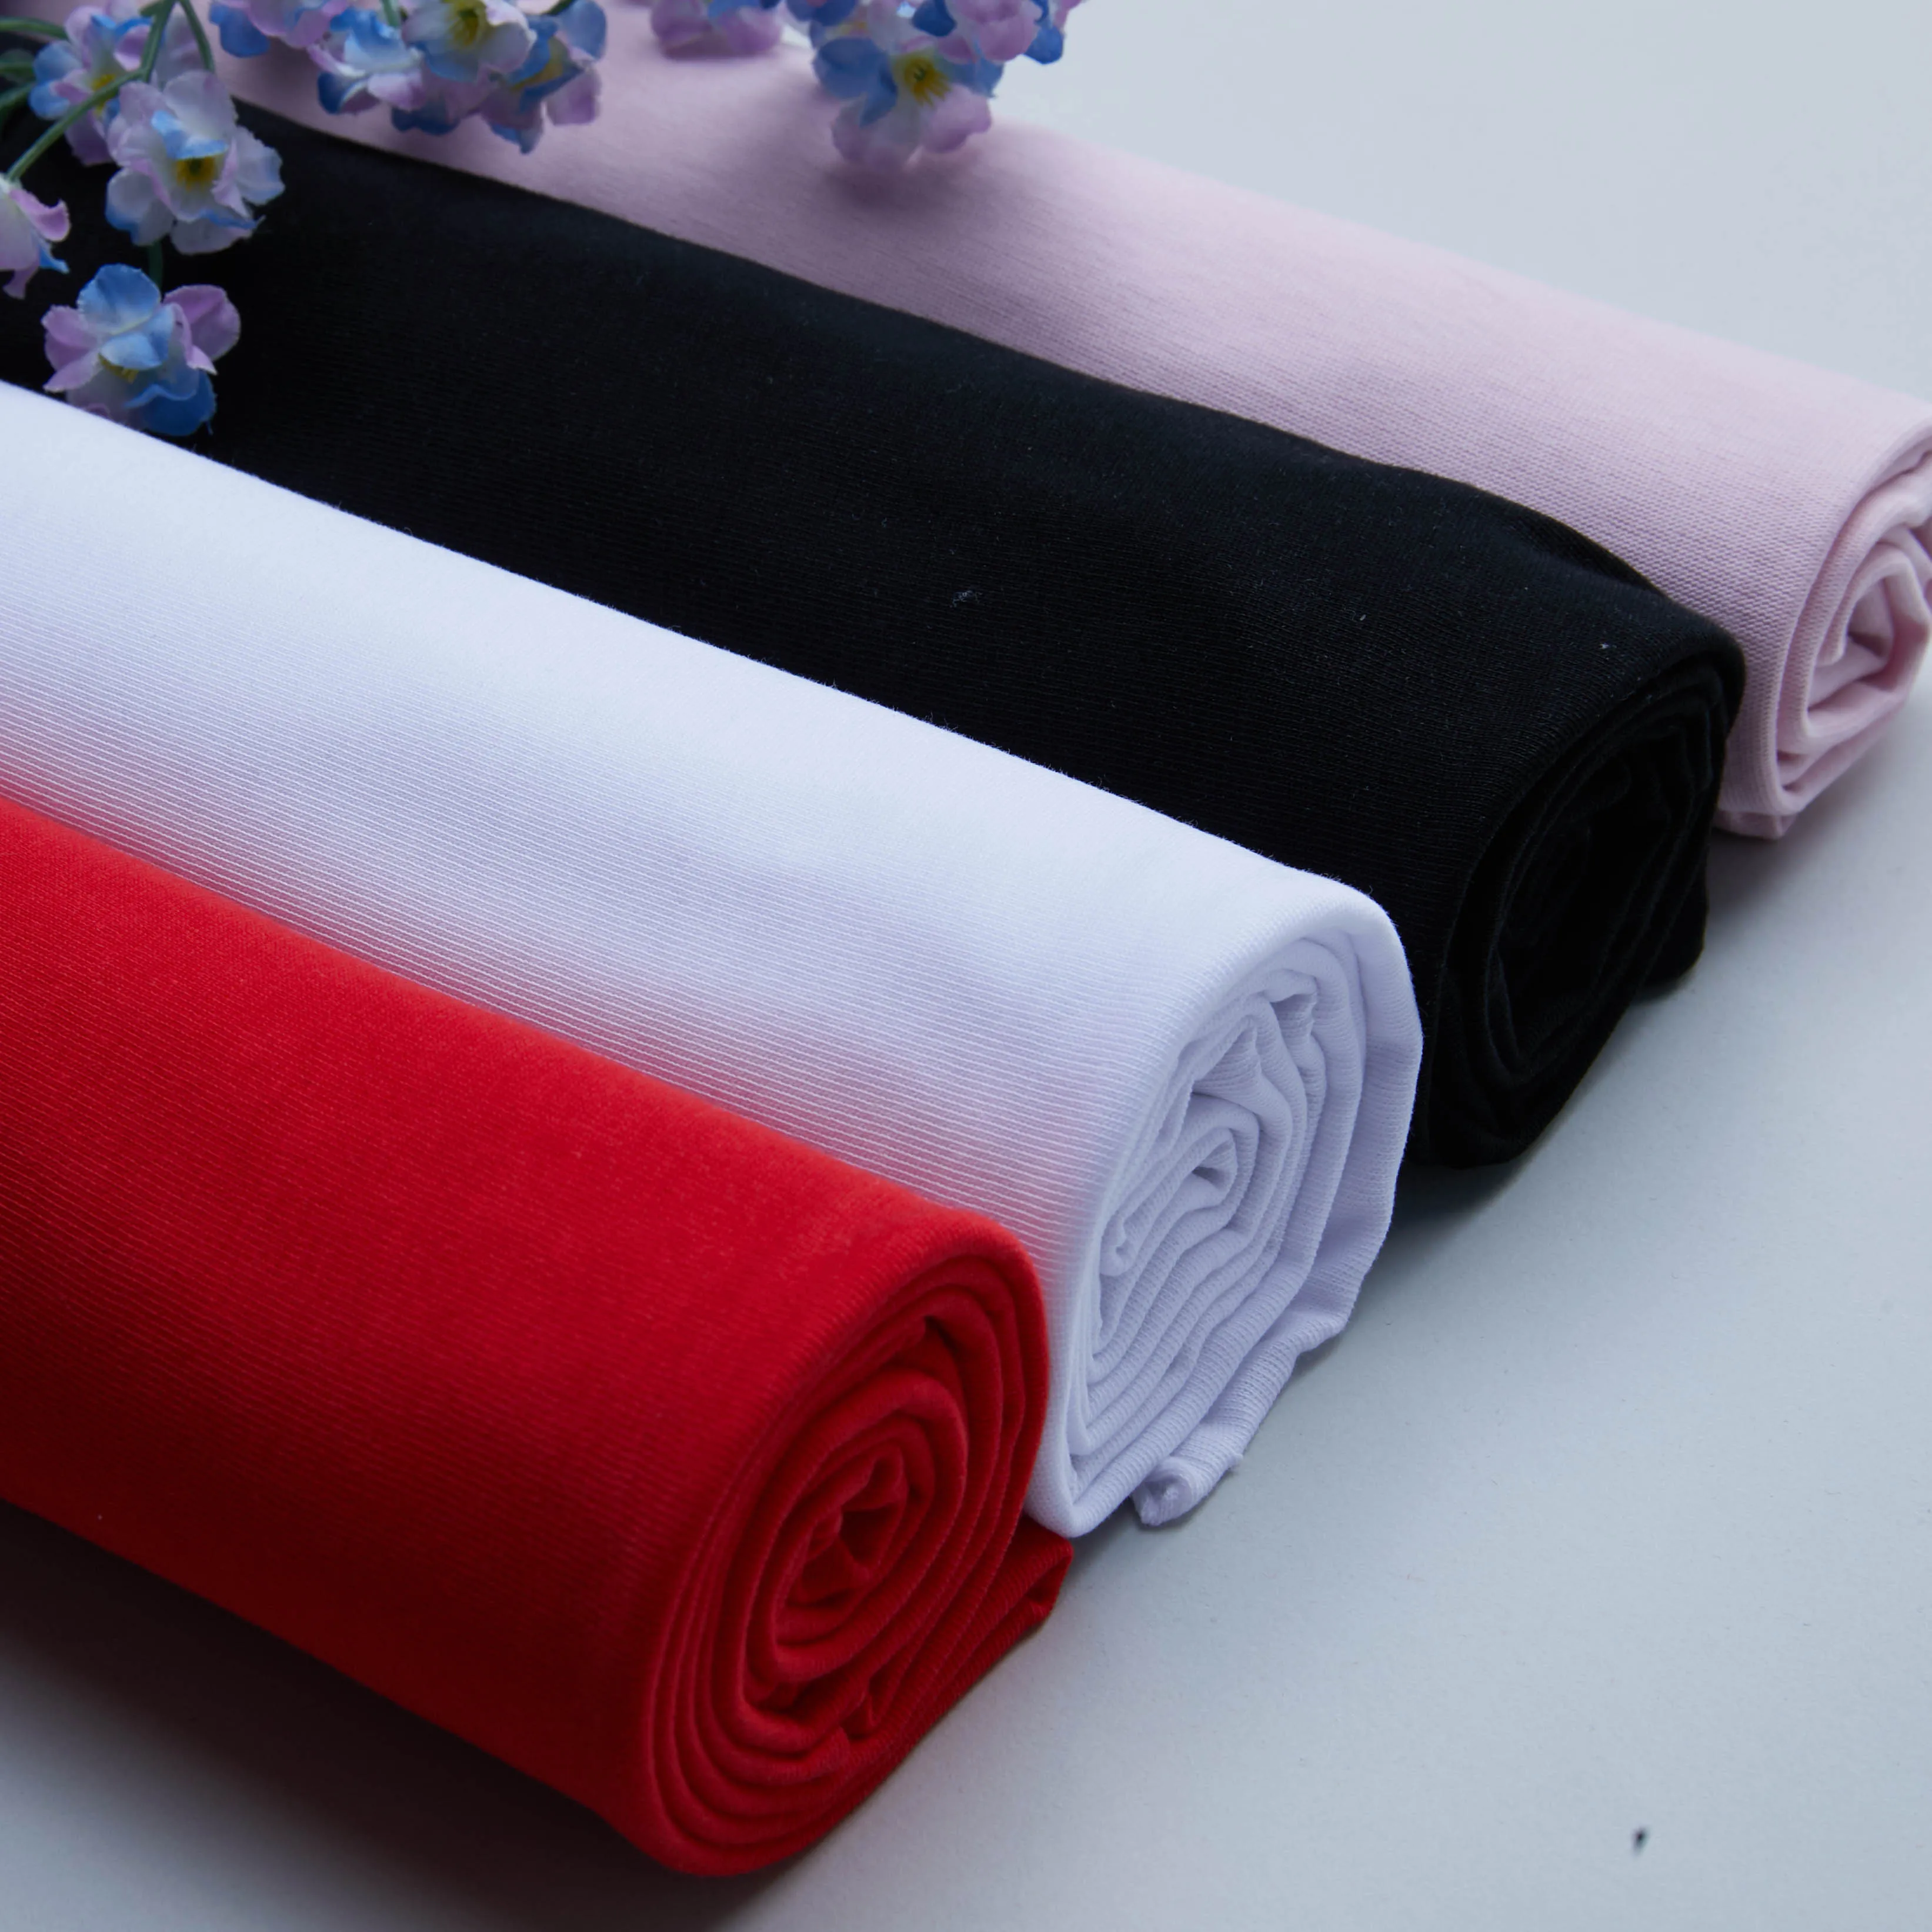 China Wholesale Factory Price 32 Yarn 100%Cotton Double Jersey Fabric For T Shirt And Garment